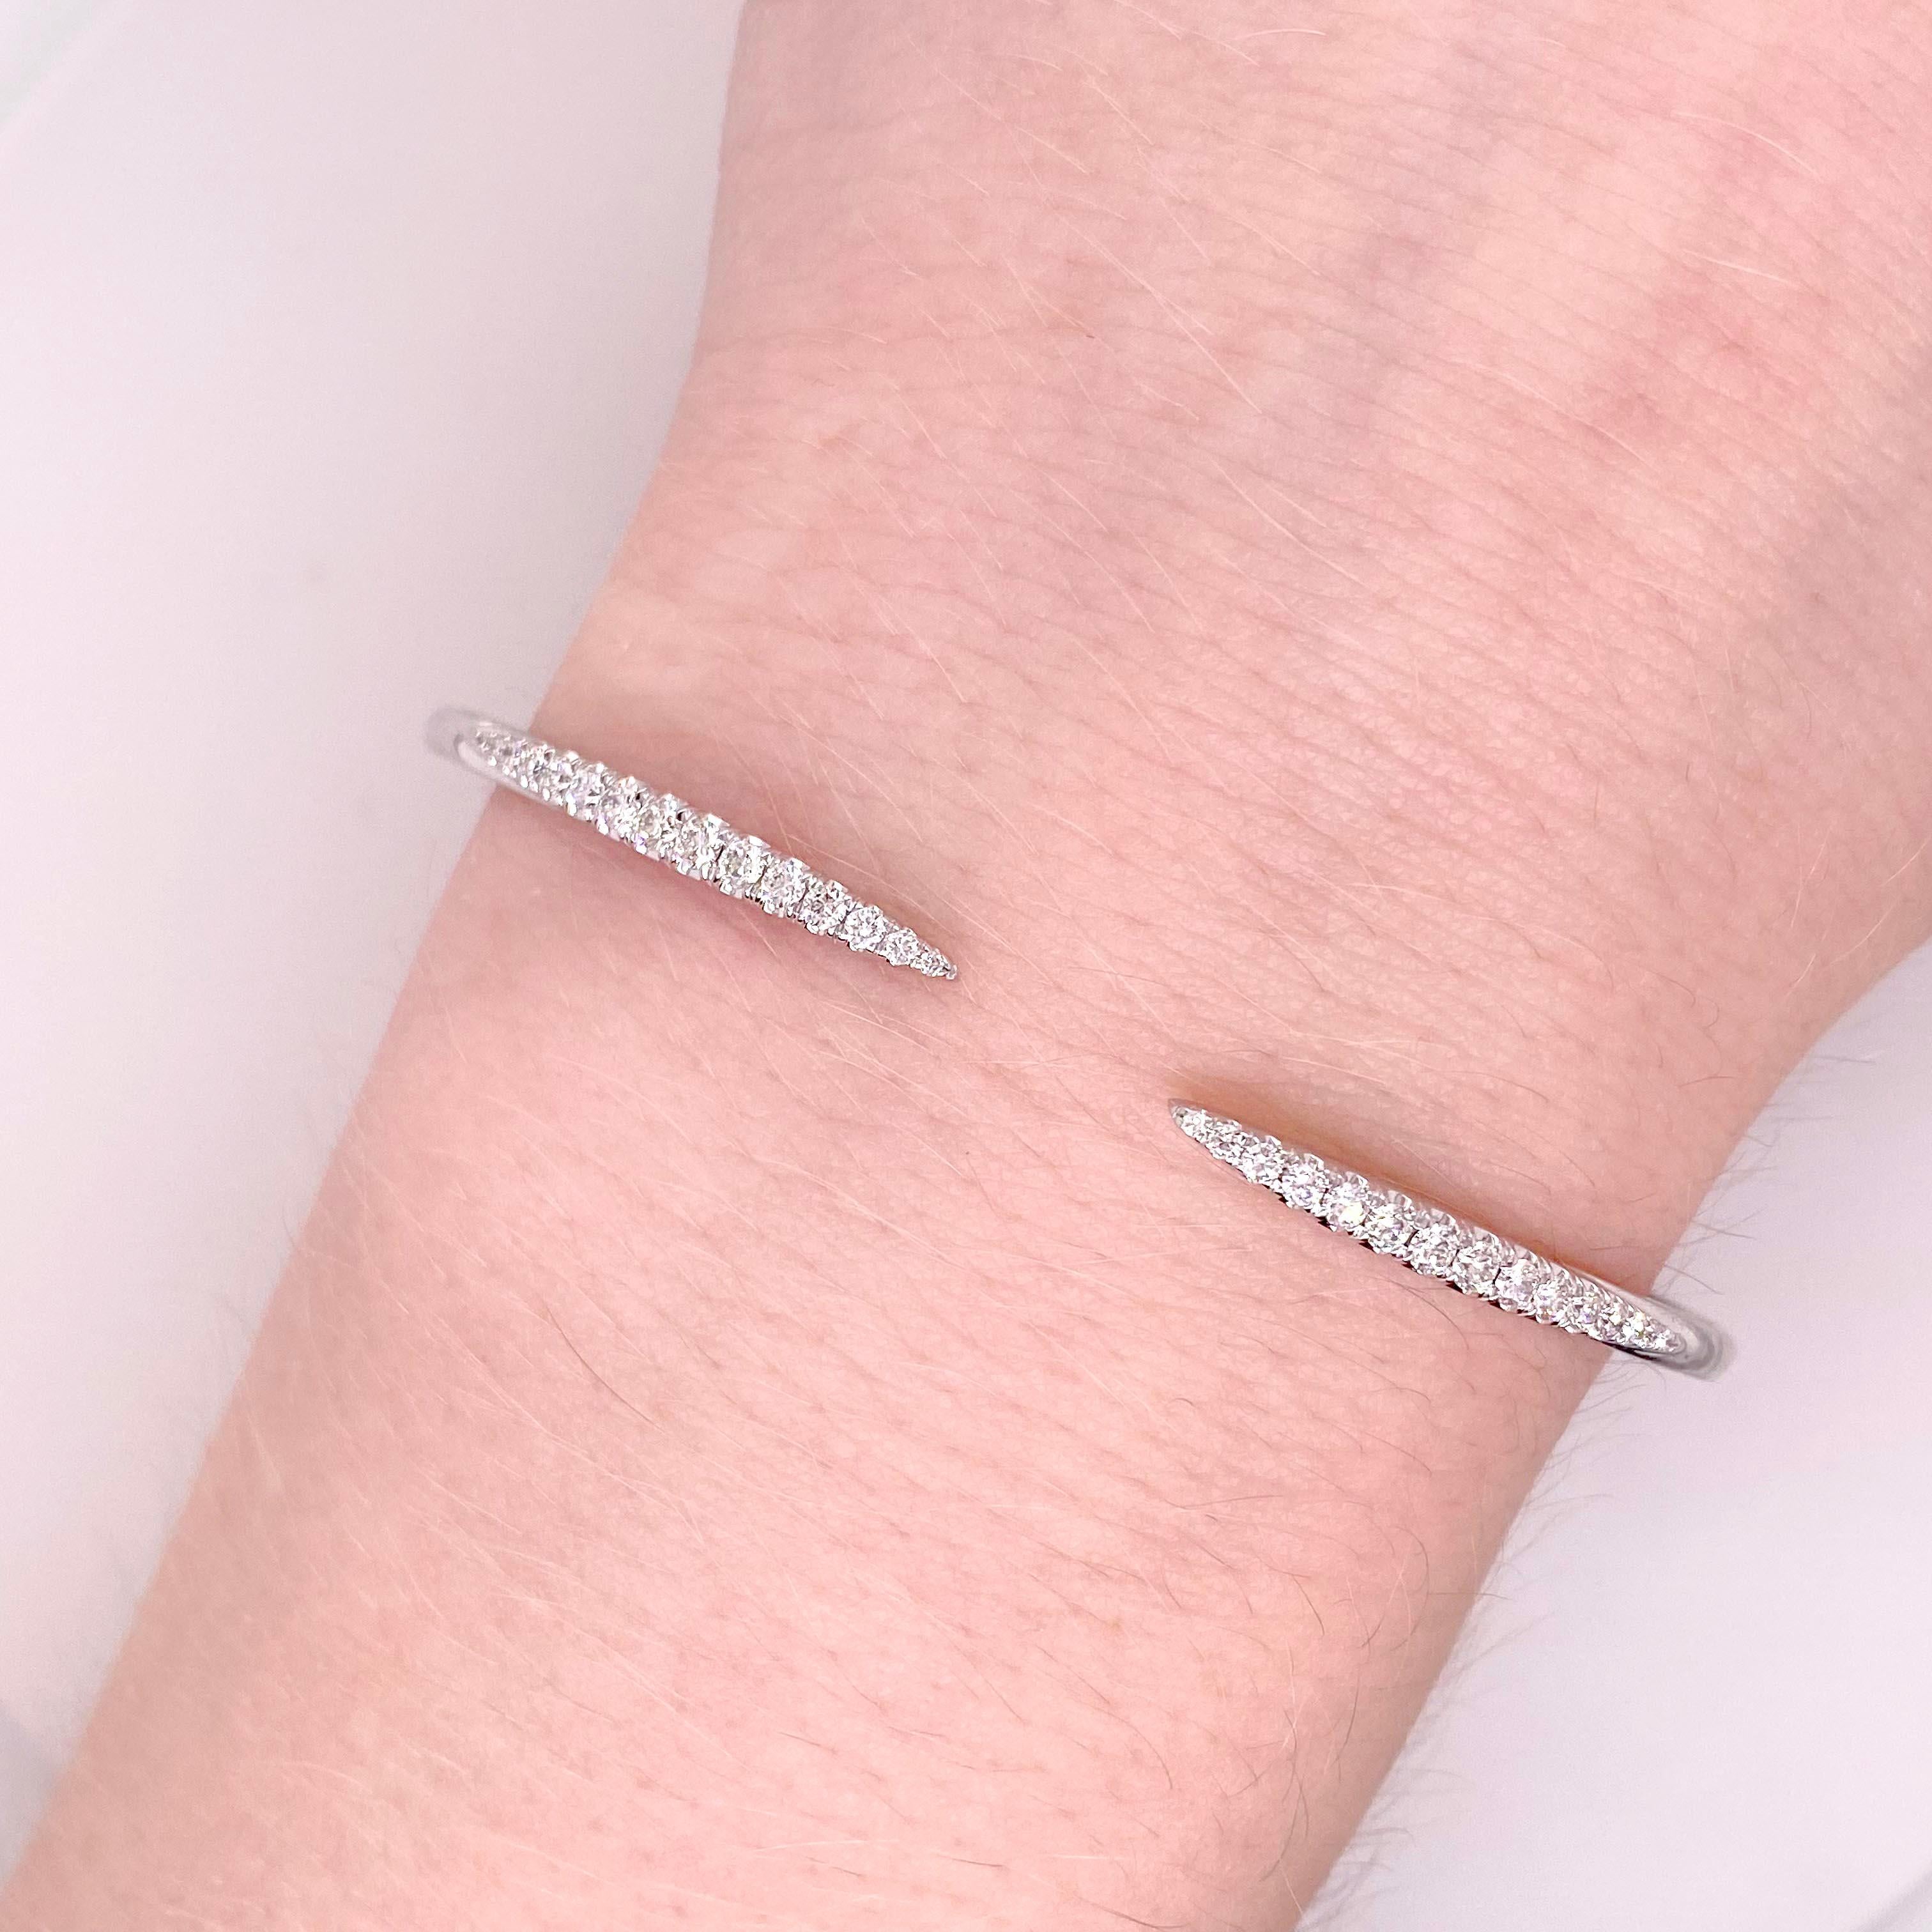 Modern diamond bracelet! This diamond bangle bracelet has spiked tips with have pave diamonds set across the tops. The bracelet is flexible, comfortable and easy to put on! With bright white diamonds set in bright white gold. This bangle bracelet